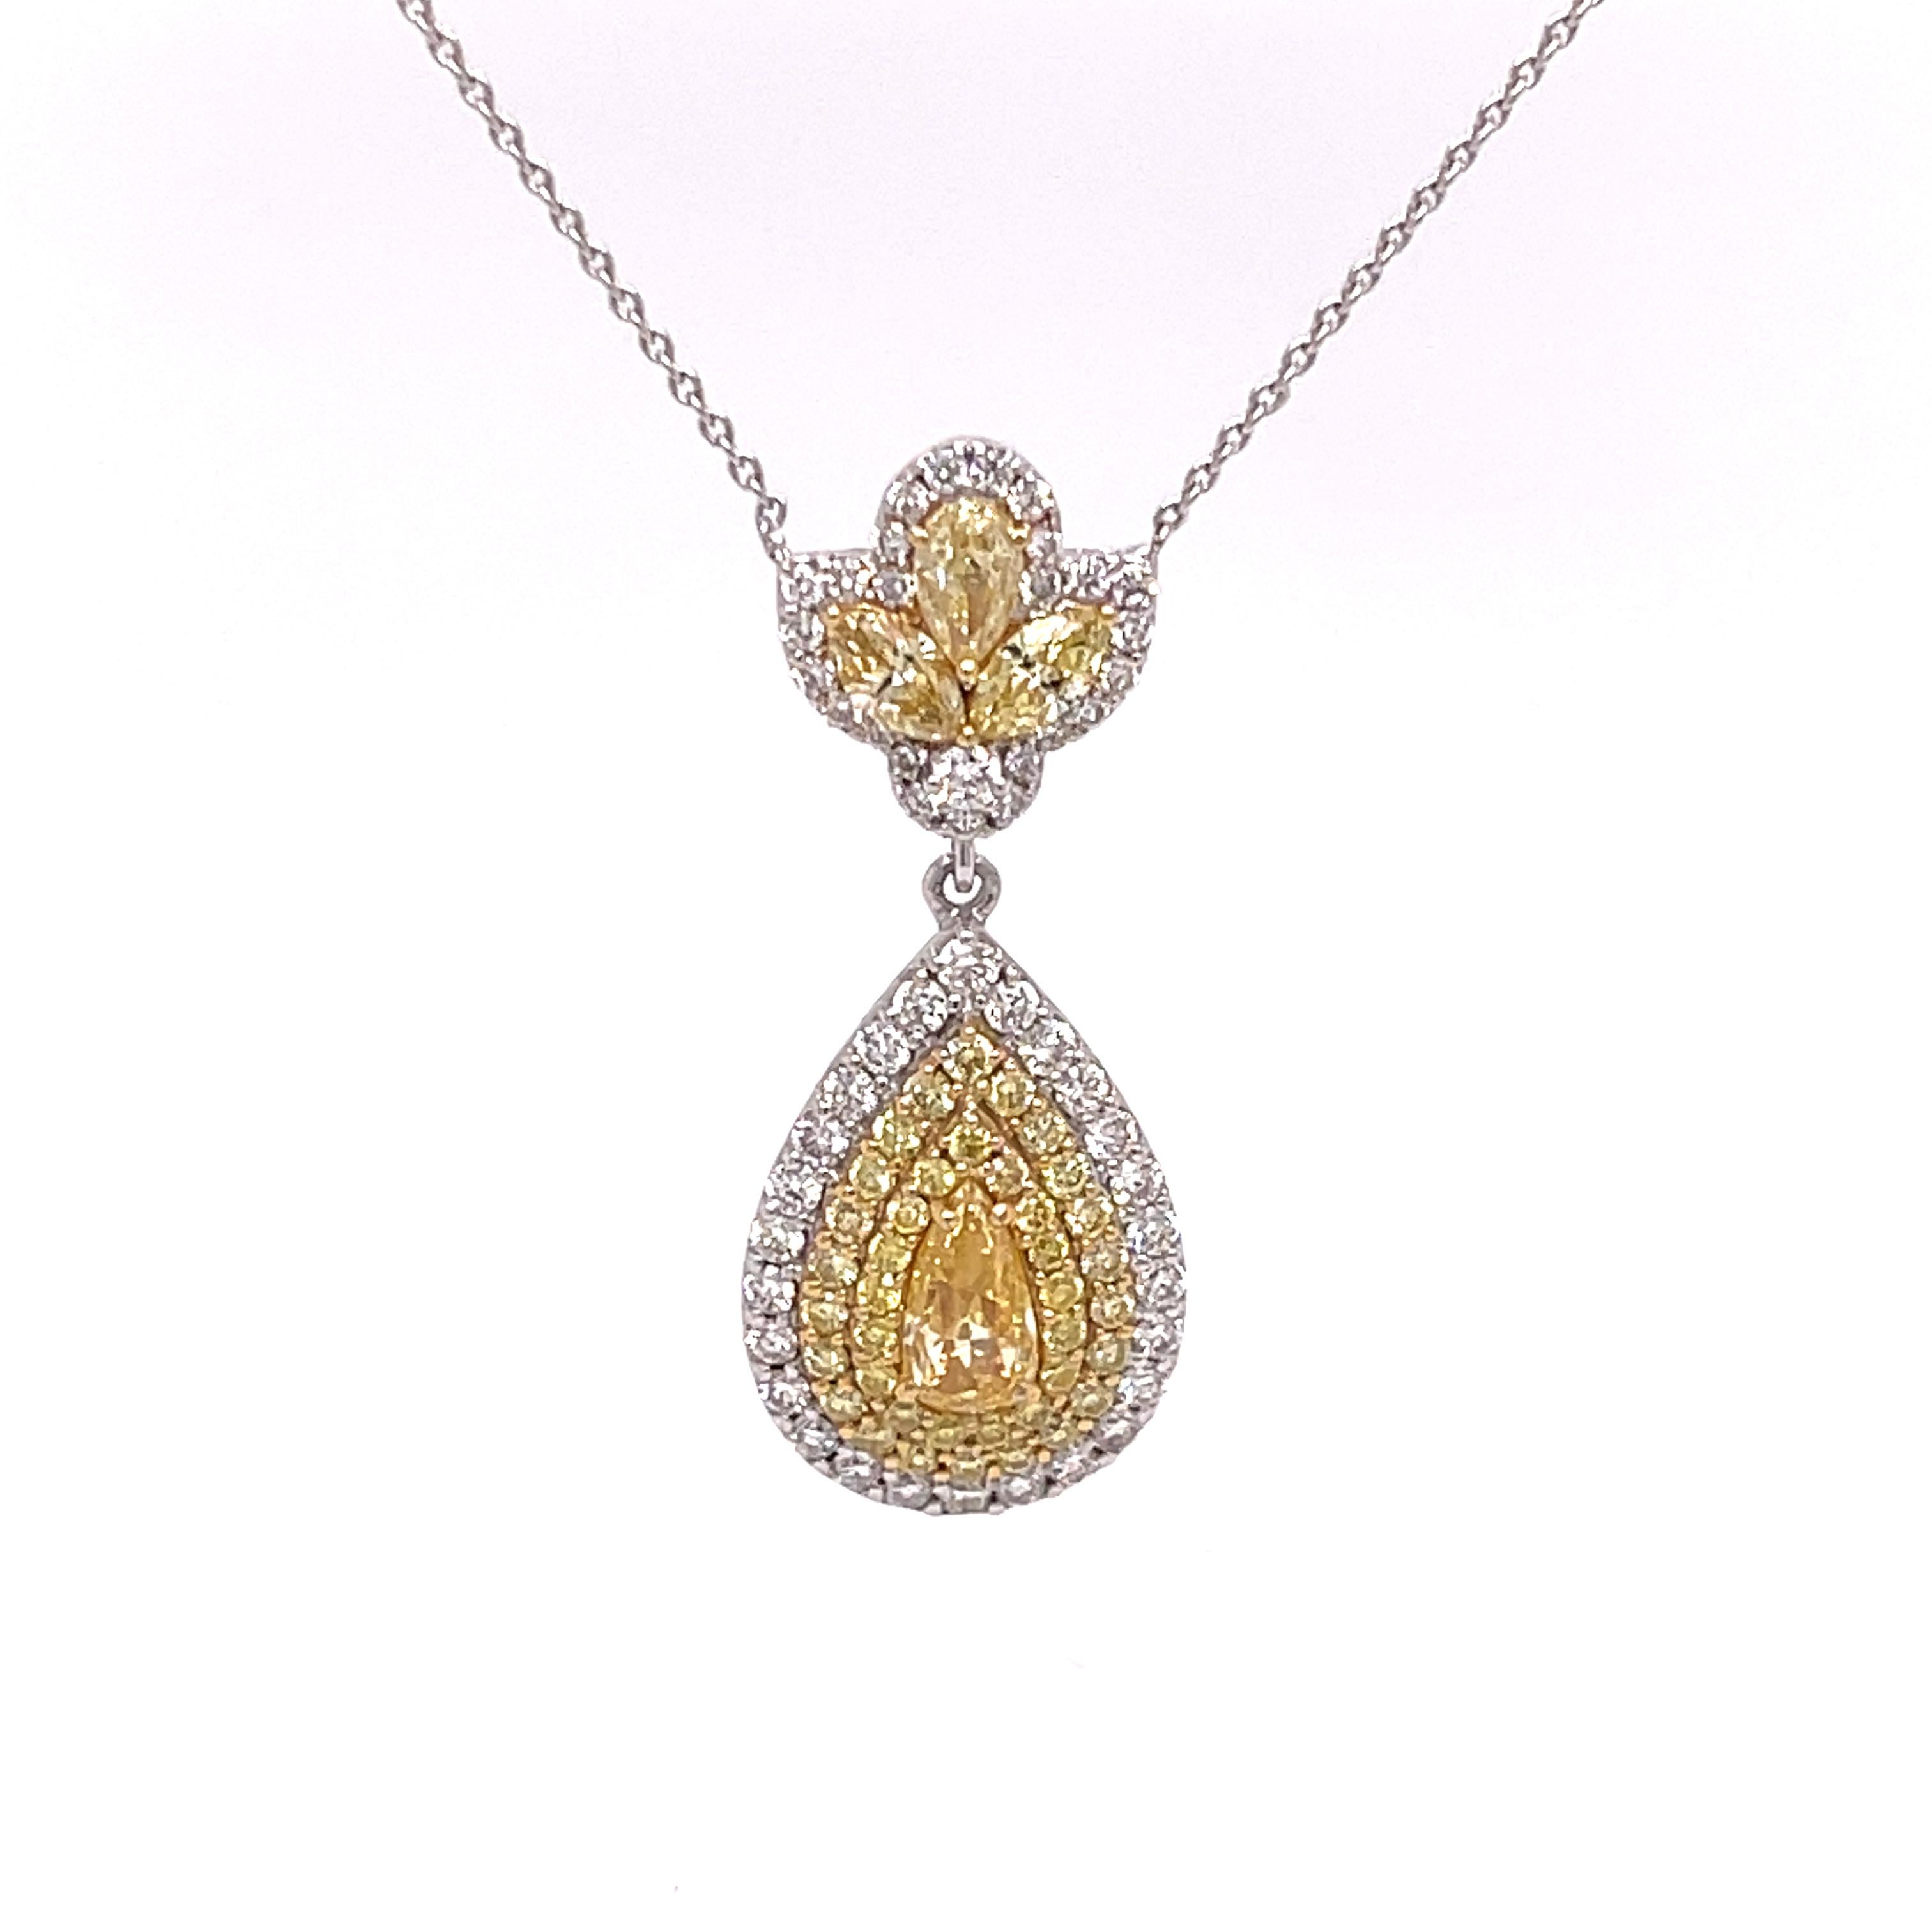 Teardrop diamond pendant necklace in 18K white gold. The pendant features 1.54ctw of yellow pear shape and round diamonds, and 0.46ctw of round white diamonds. The chain can be worn at a 18